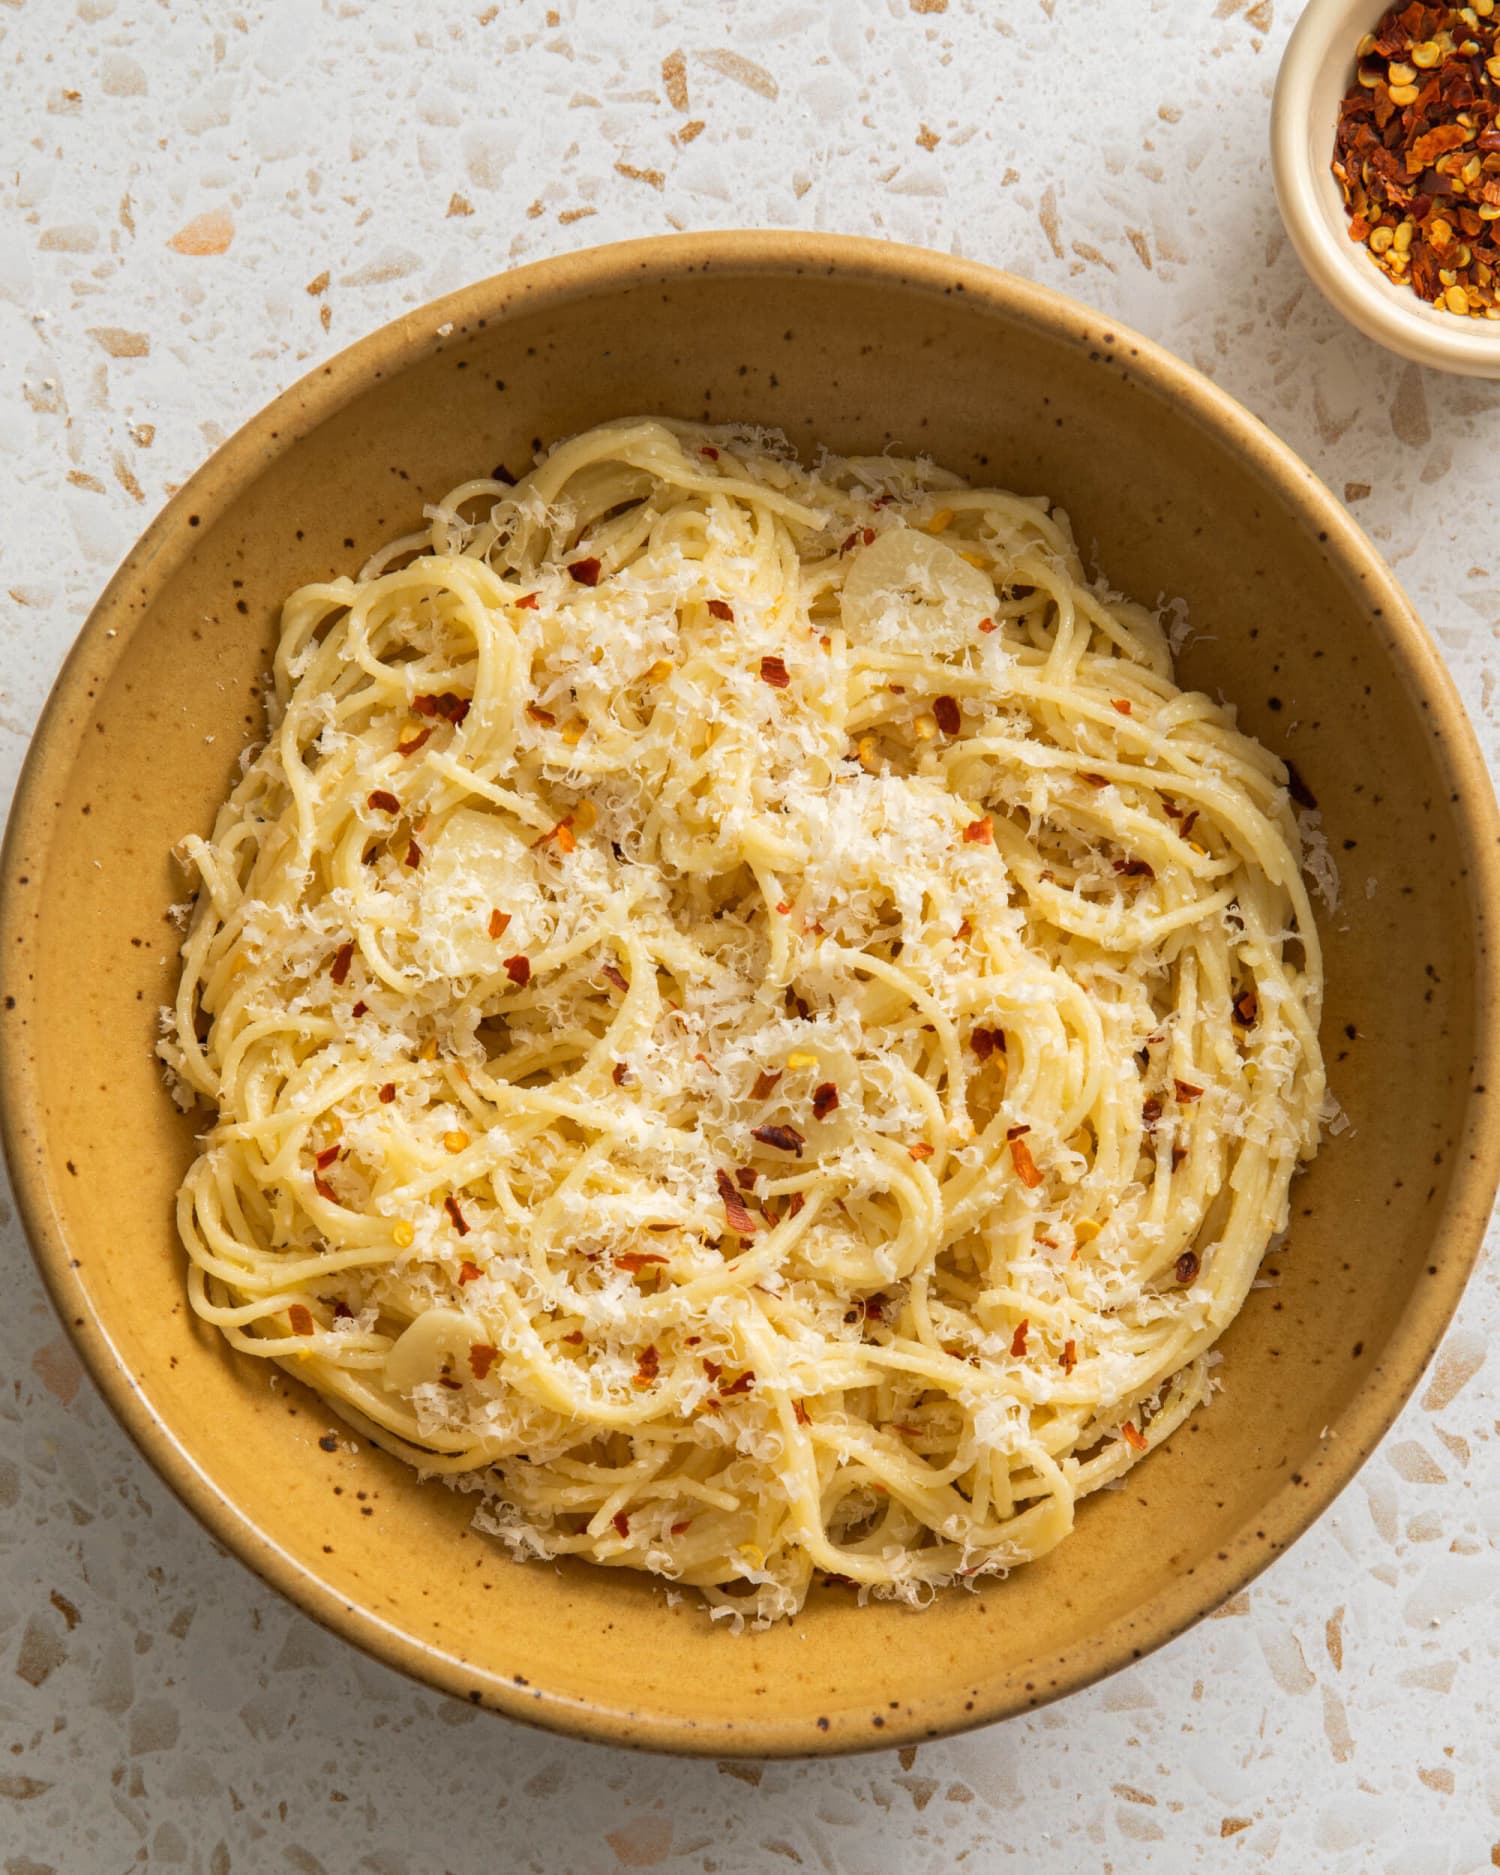 This Easy, Breezy Capellini Pasta Is Perfect When You Feel Like Doing the Bare Minimum